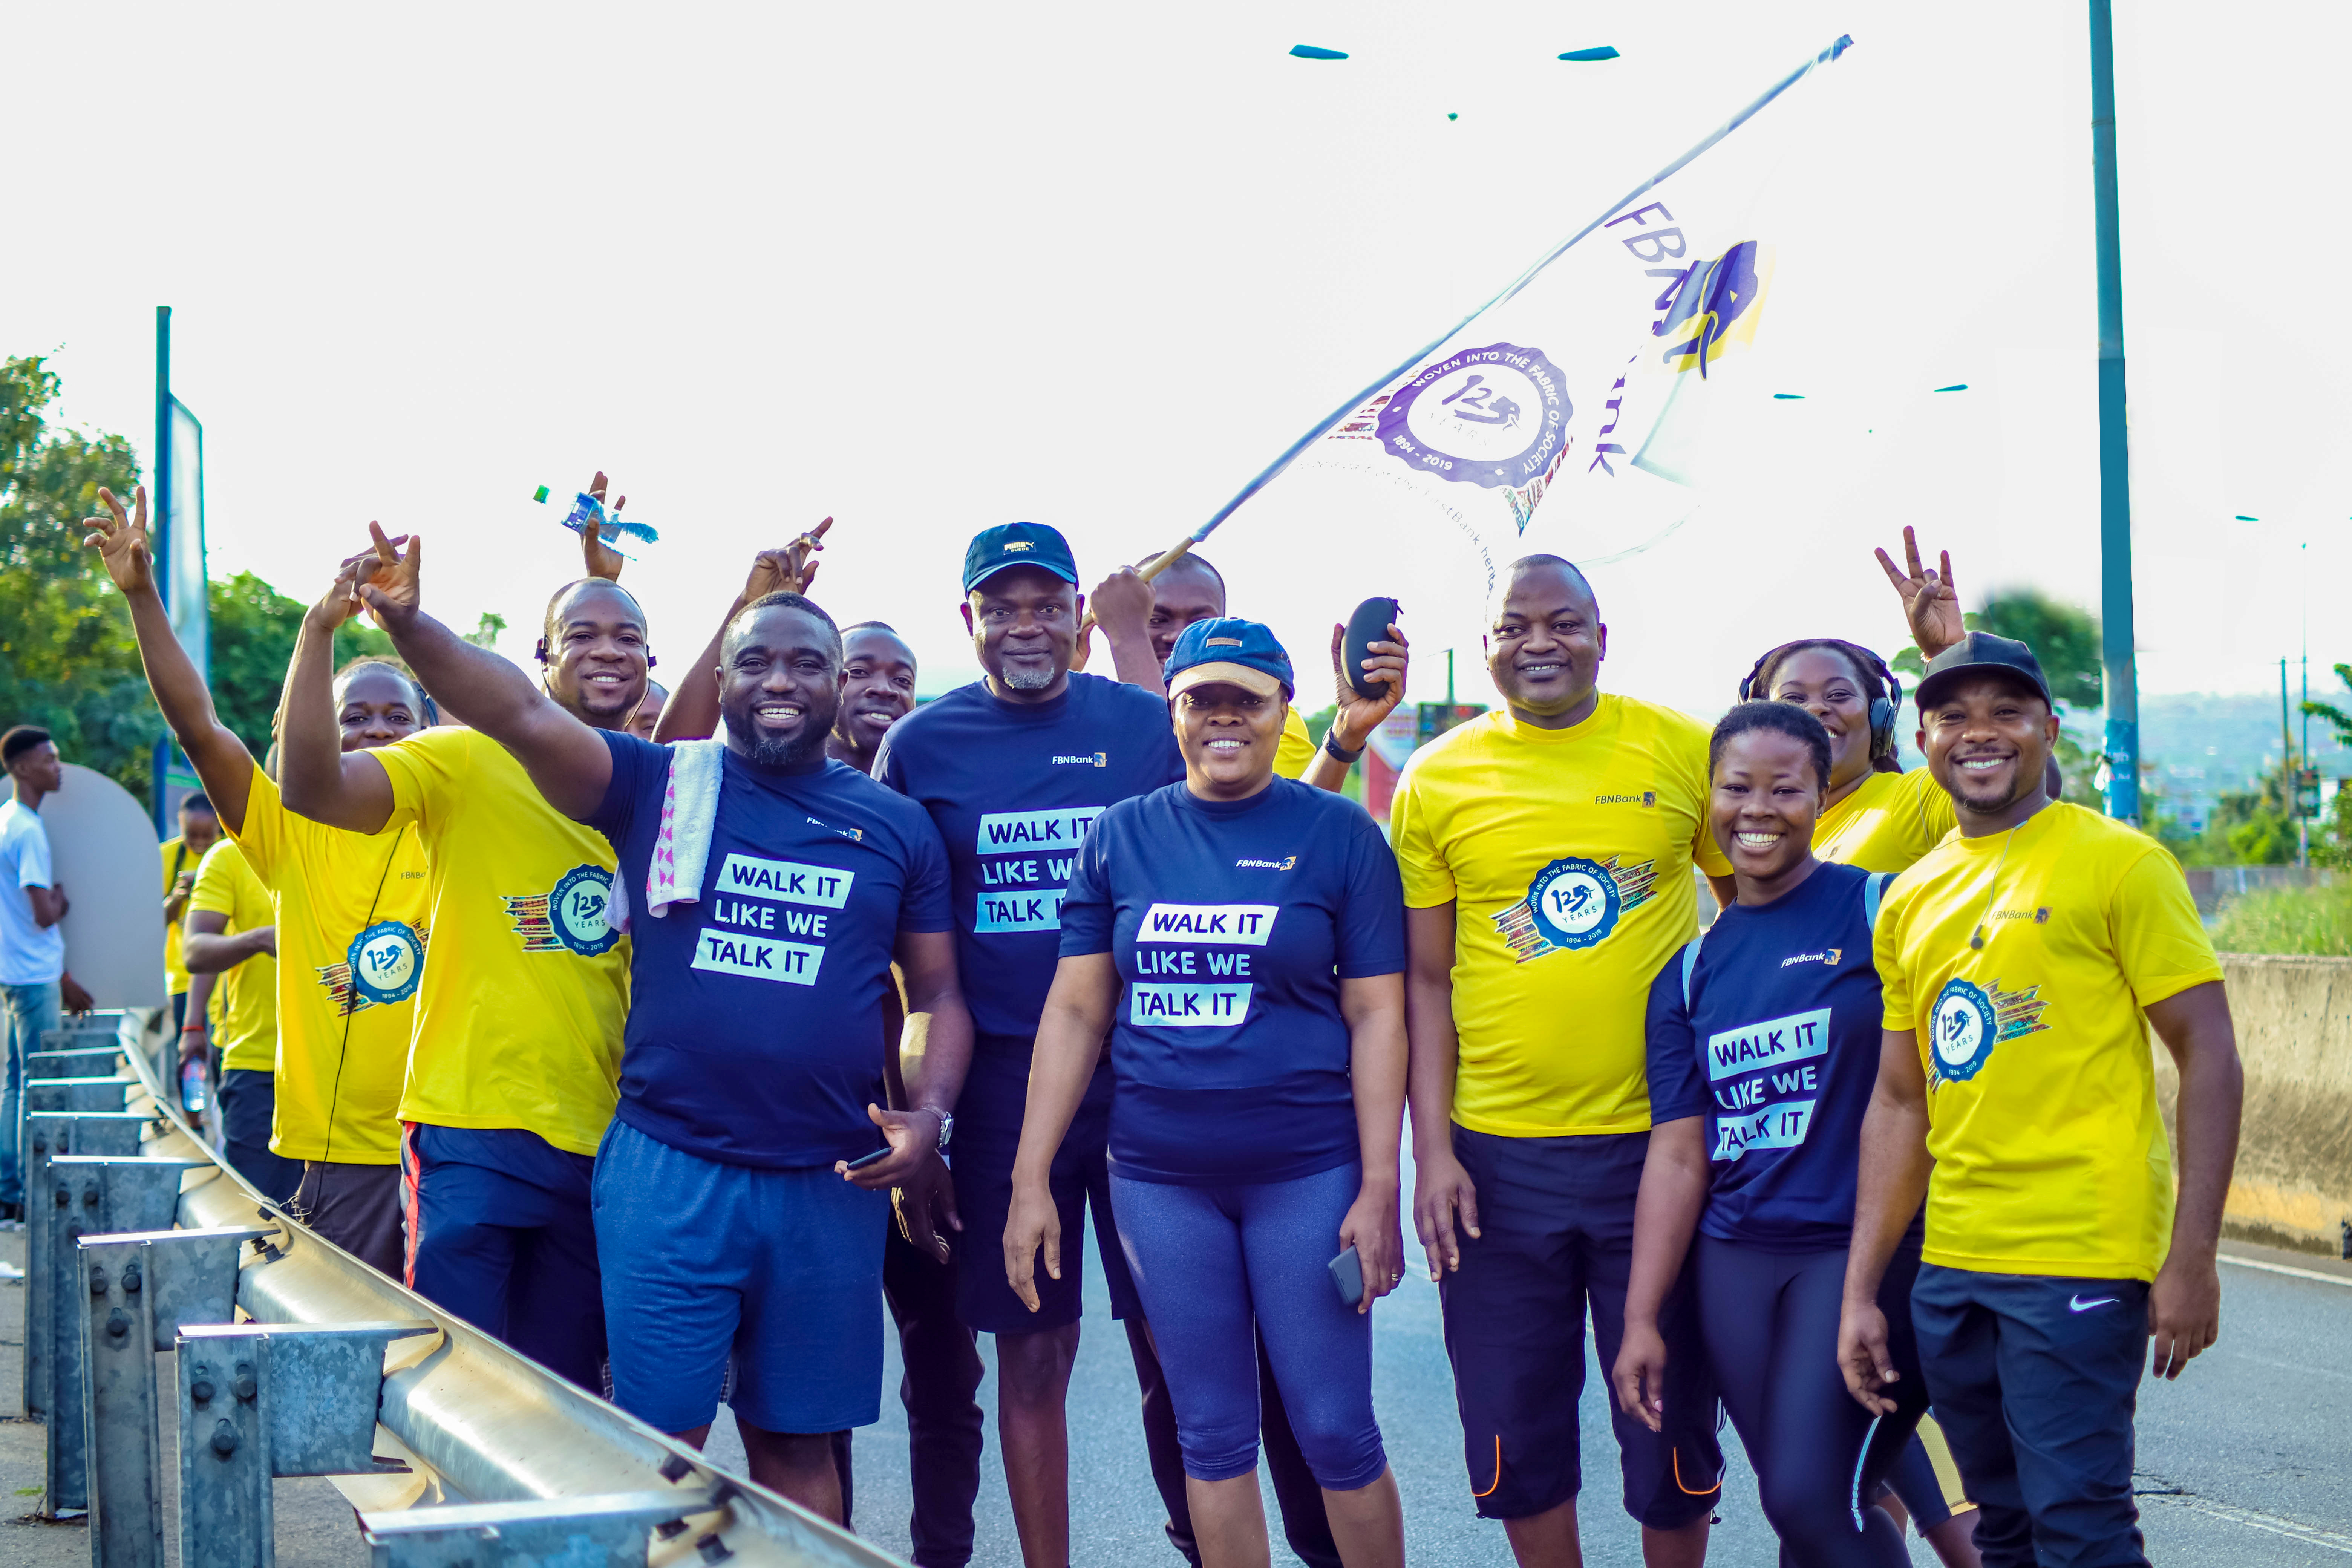 Group picture of a cross section of staff that walked are FBNBank Ghana MD, Gbenga Odeyemi, third from left, visiting Technology & Services Executive from FirstBank, Mrs. Rachel Adeshinafourth from right and FBNBank Ghana CFO, Semiu Lamidi, third from right.